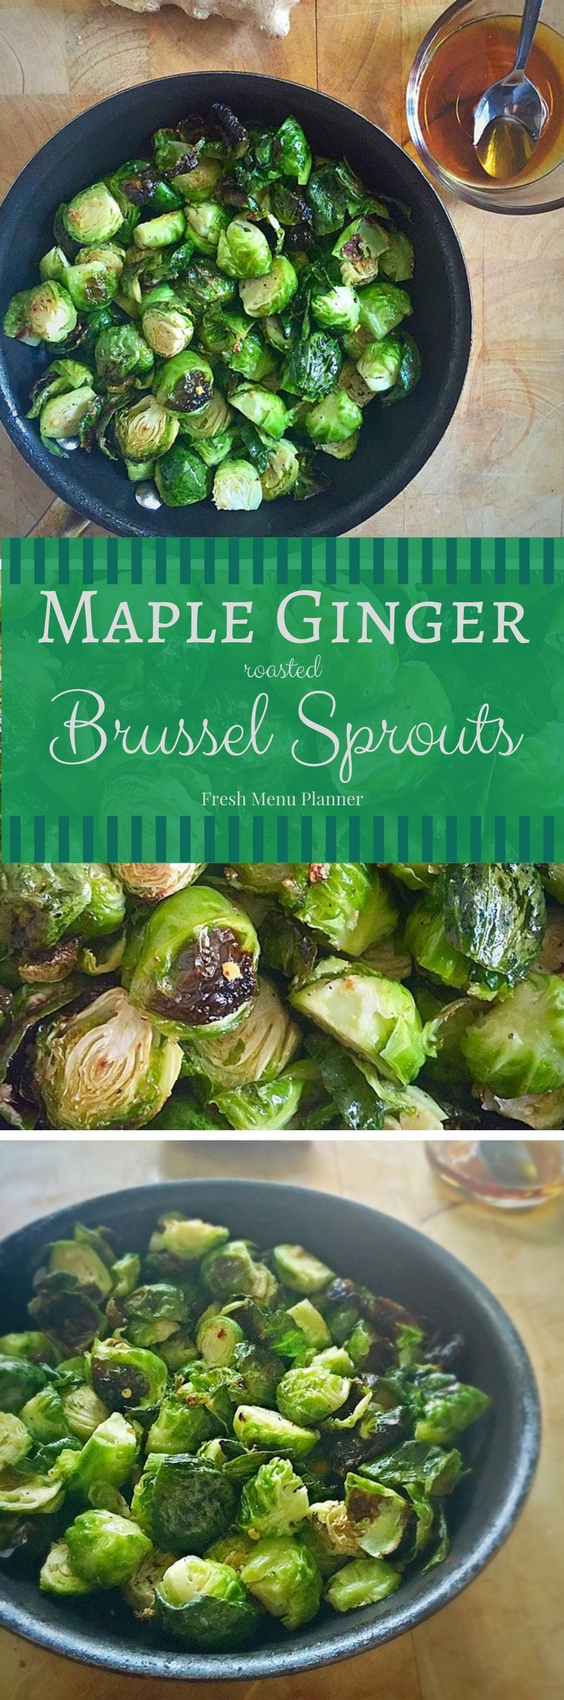 Maple Ginger Roasted Brussel Sprouts